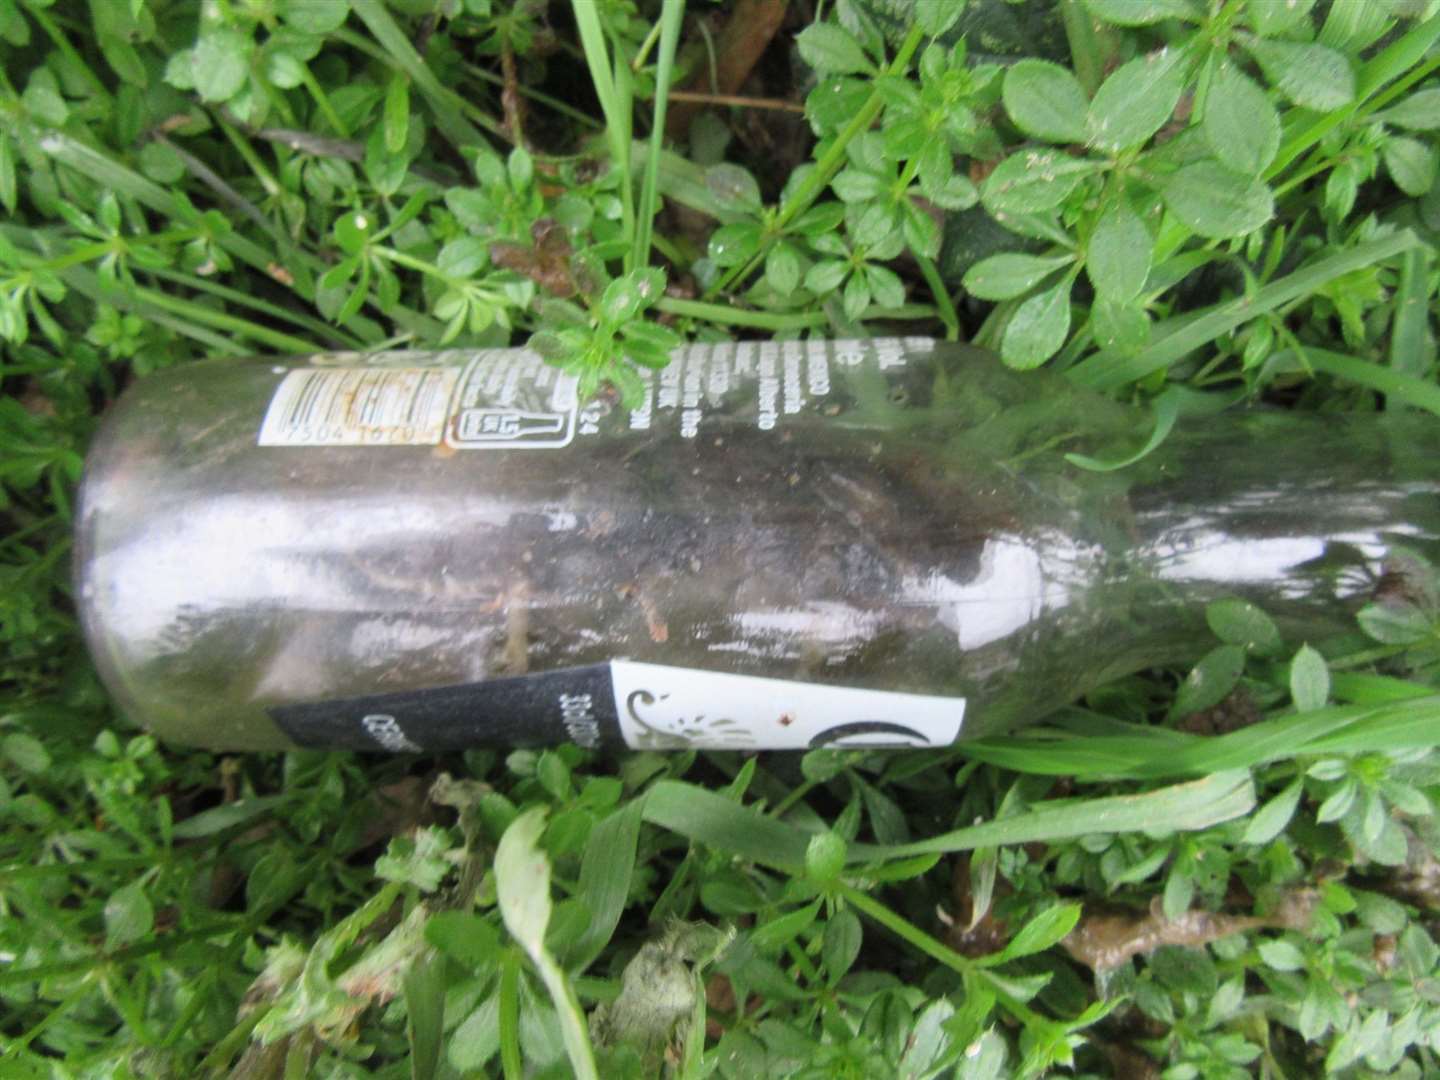 Another mammal became stuck in a beer bottle